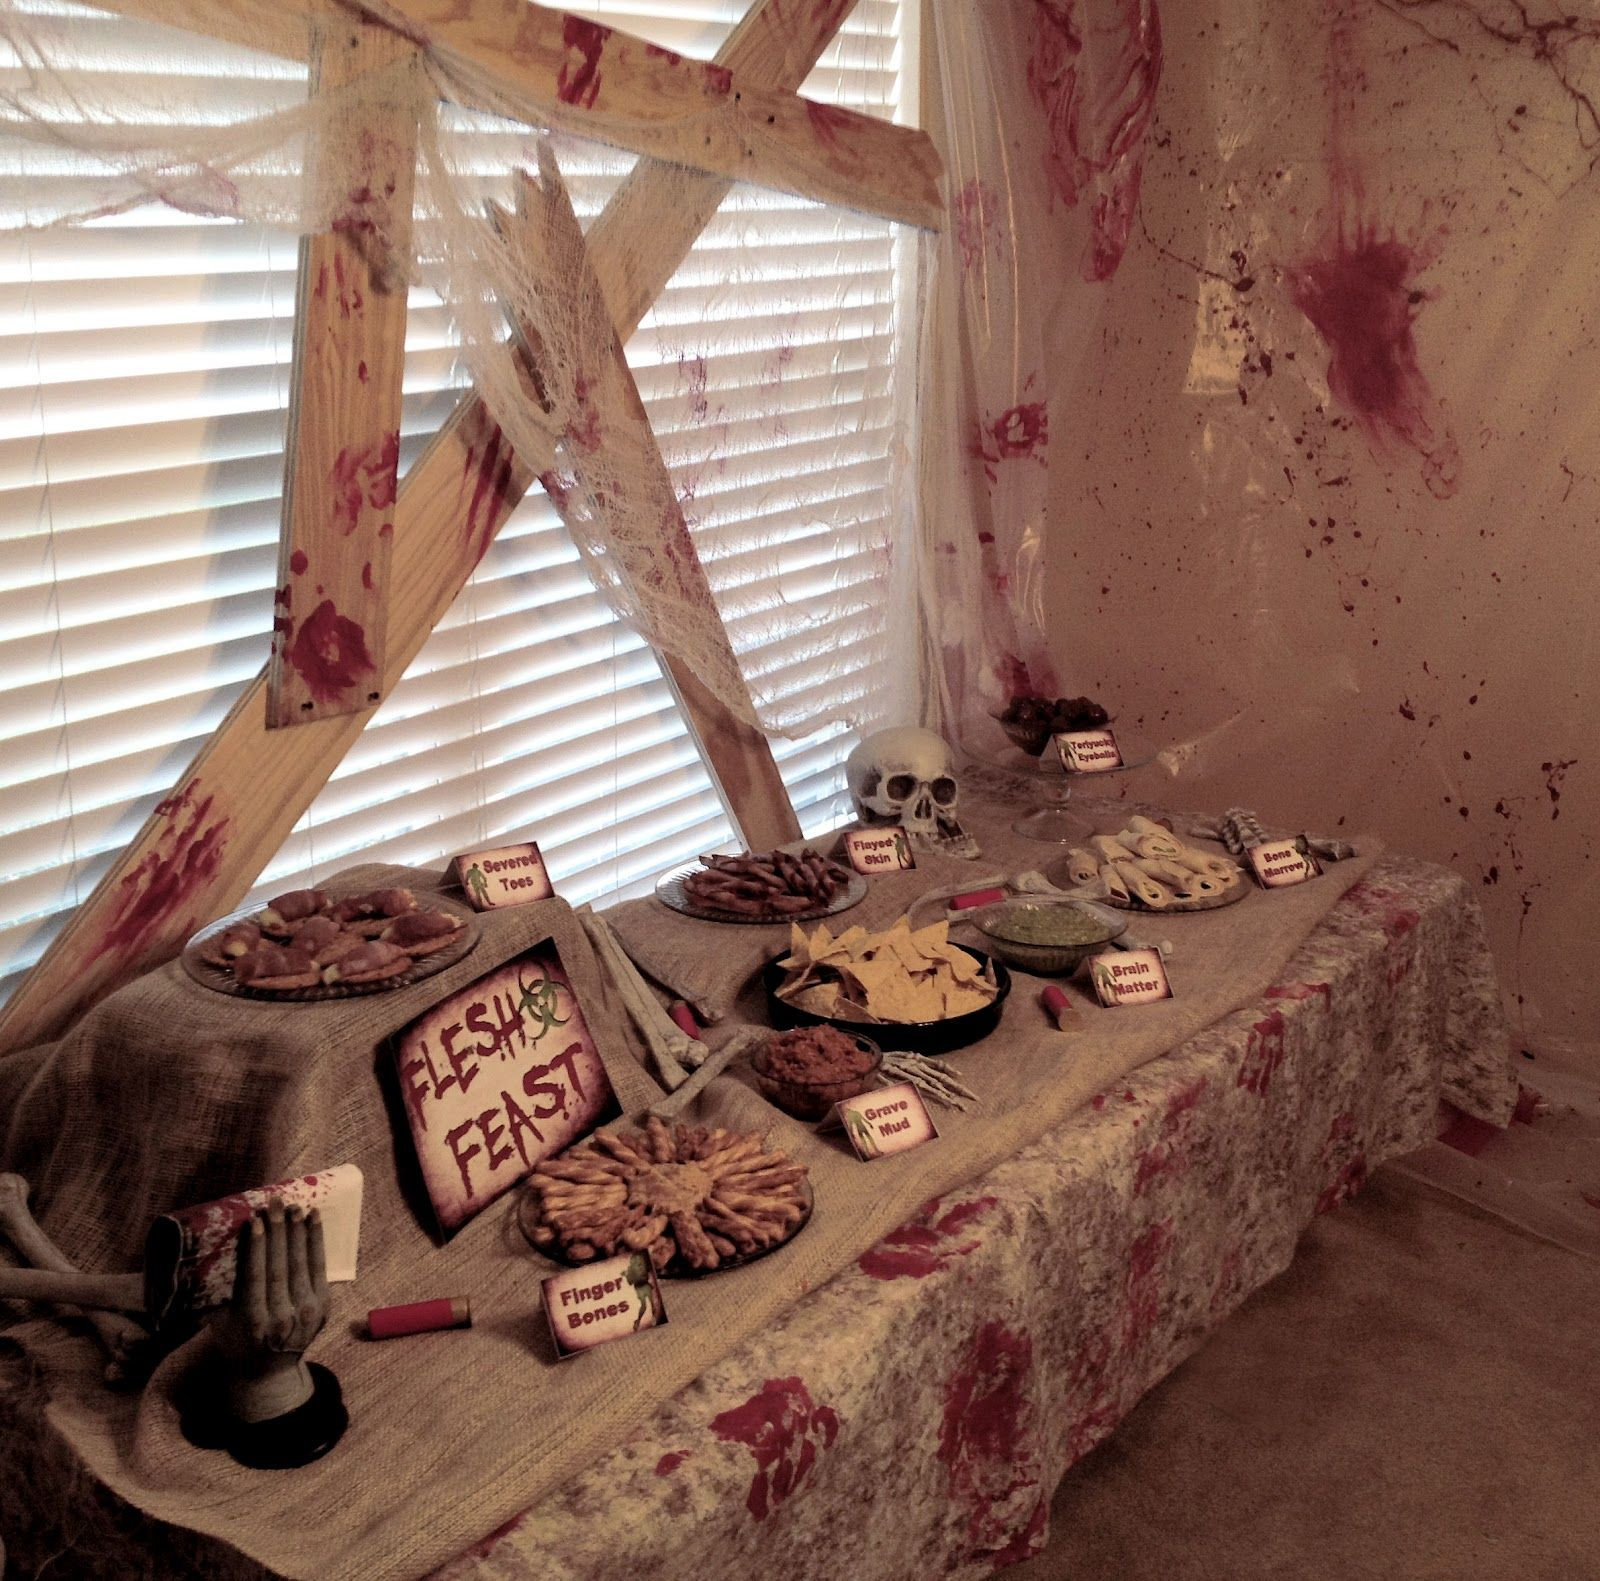 Halloween Party Decorating Ideas For Adults
 Decor Zombie Decorations The Collection Indoors